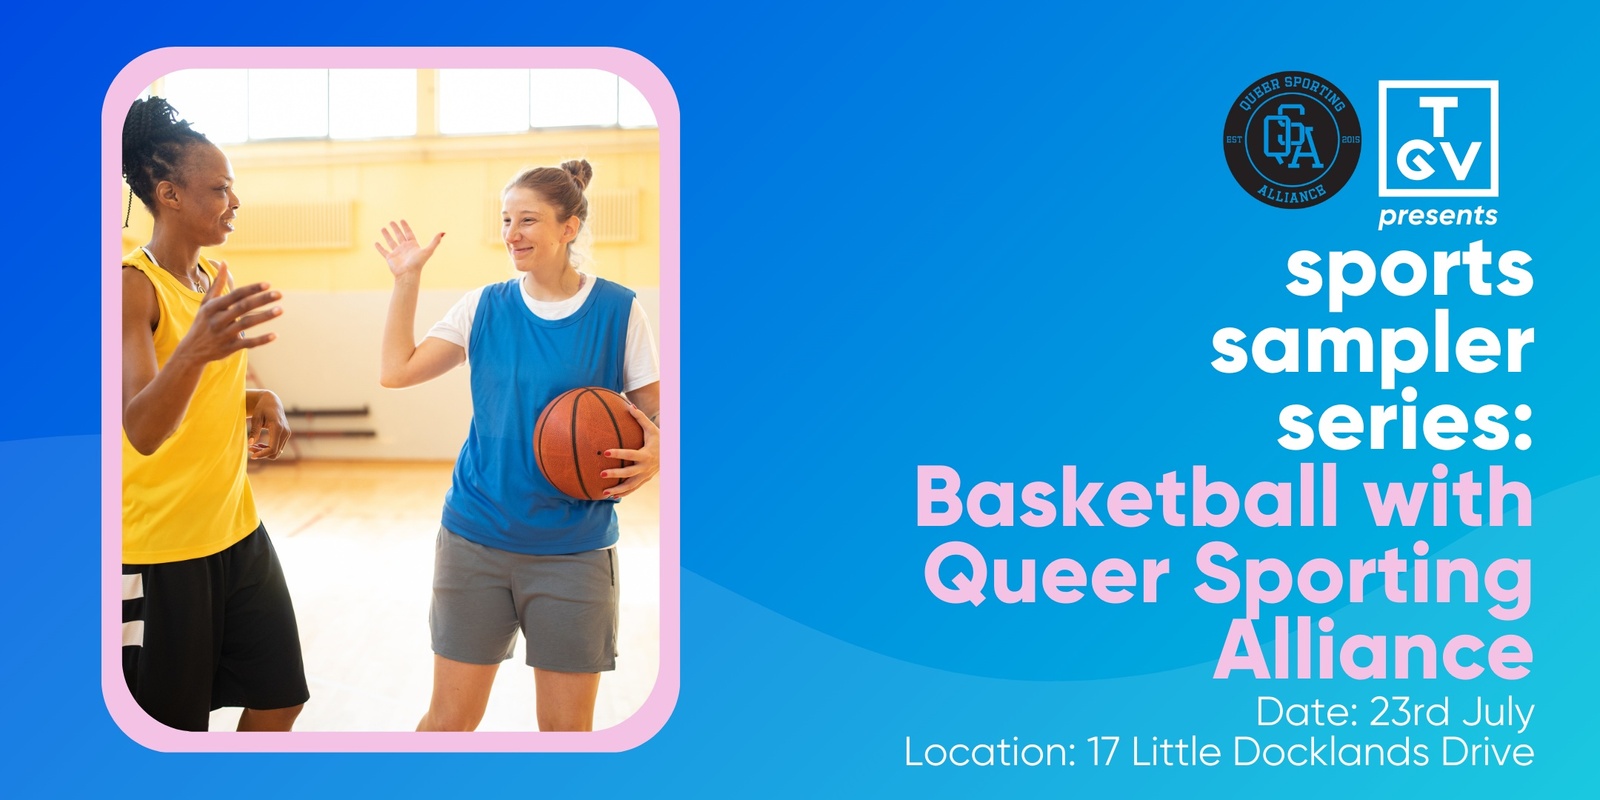 Banner image for TGV Sports Sampler Series: Basketball with Queer Sporting Alliance